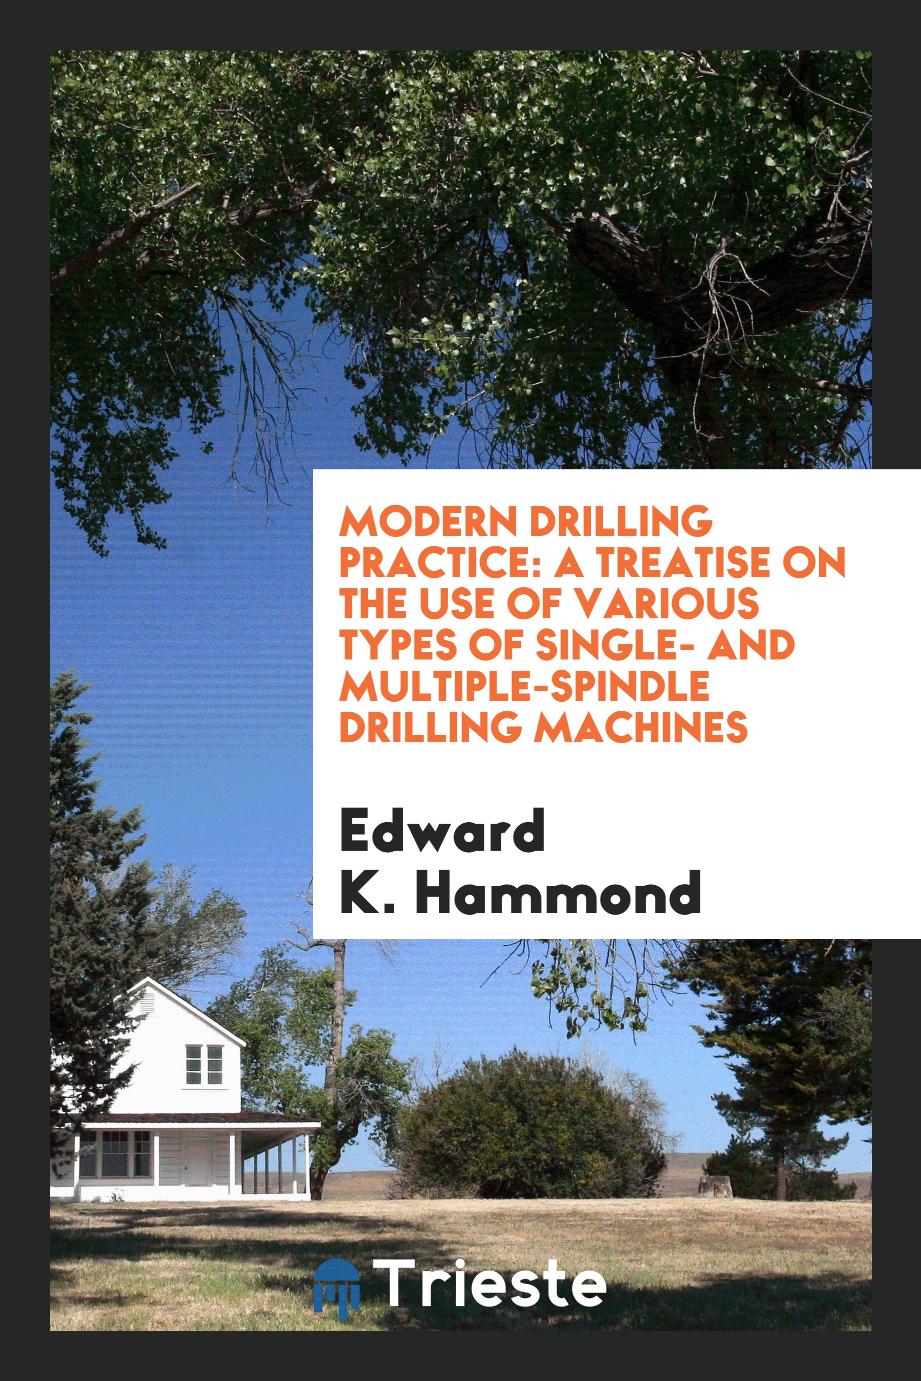 Modern Drilling Practice: A Treatise on the Use of Various Types of Single- and Multiple-Spindle Drilling Machines